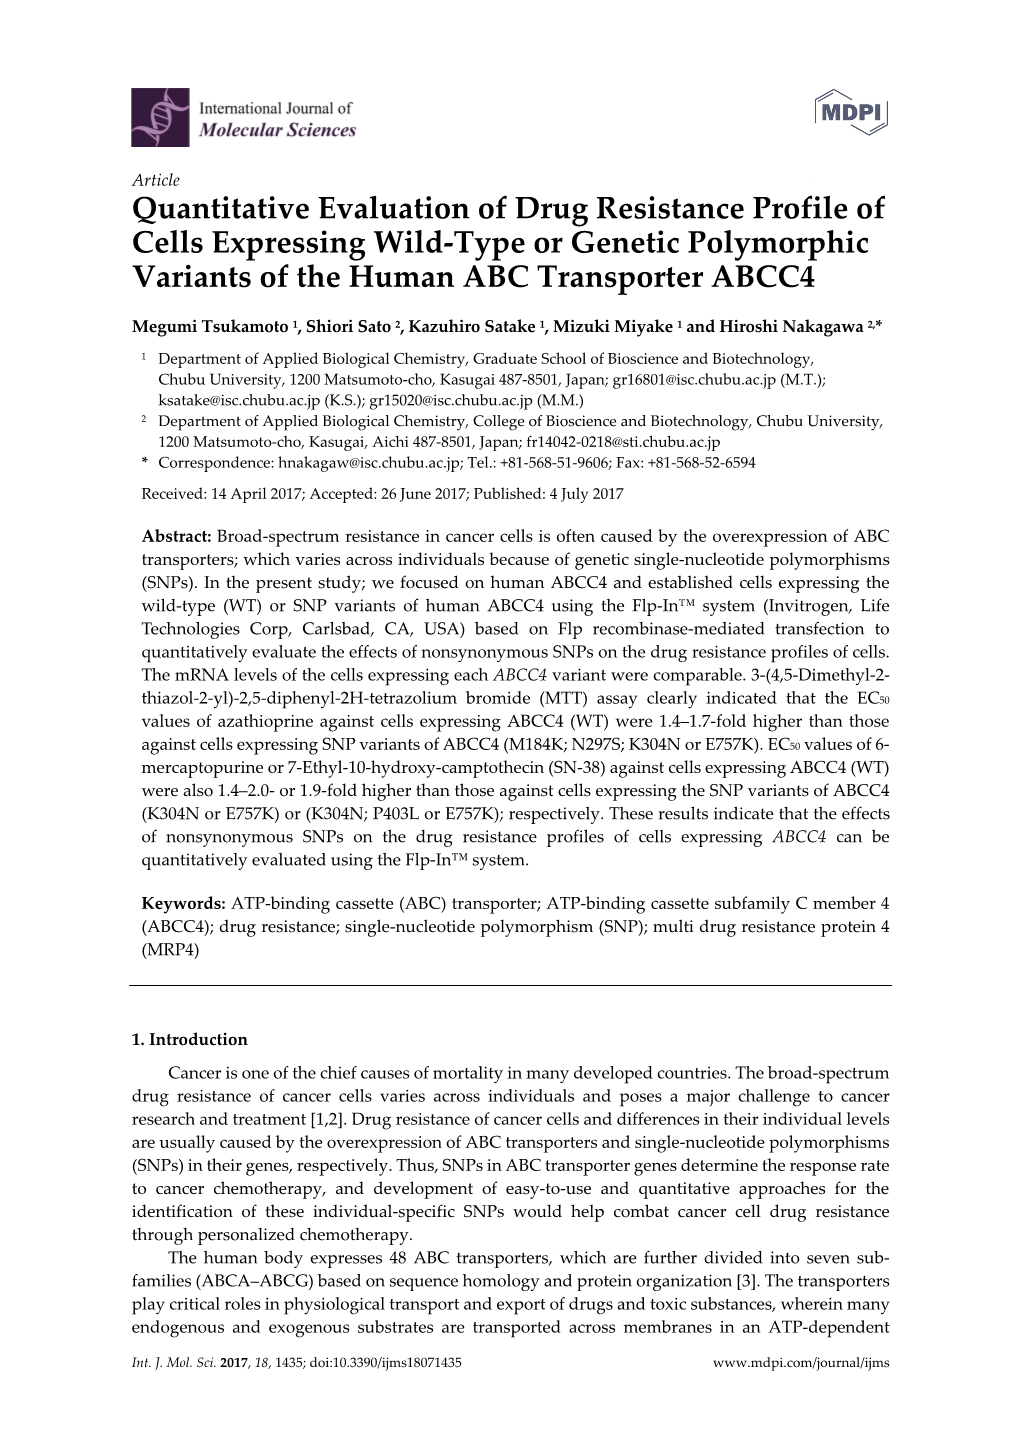 Quantitative Evaluation of Drug Resistance Profile of Cells Expressing Wild-Type Or Genetic Polymorphic Variants of the Human ABC Transporter ABCC4